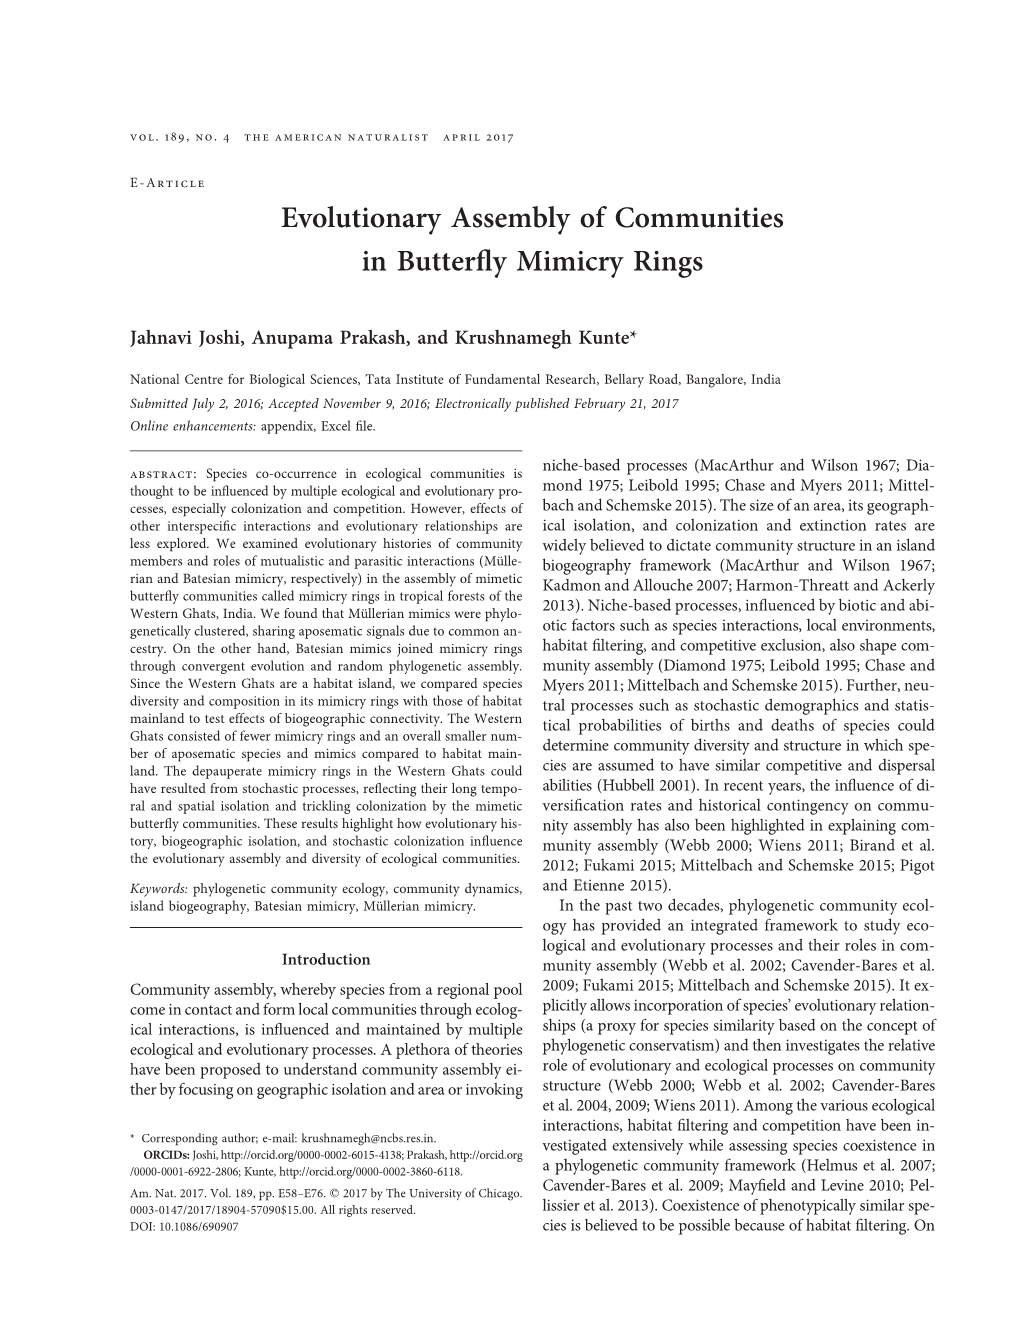 Evolutionary Assembly of Communities in Butterfly Mimicry